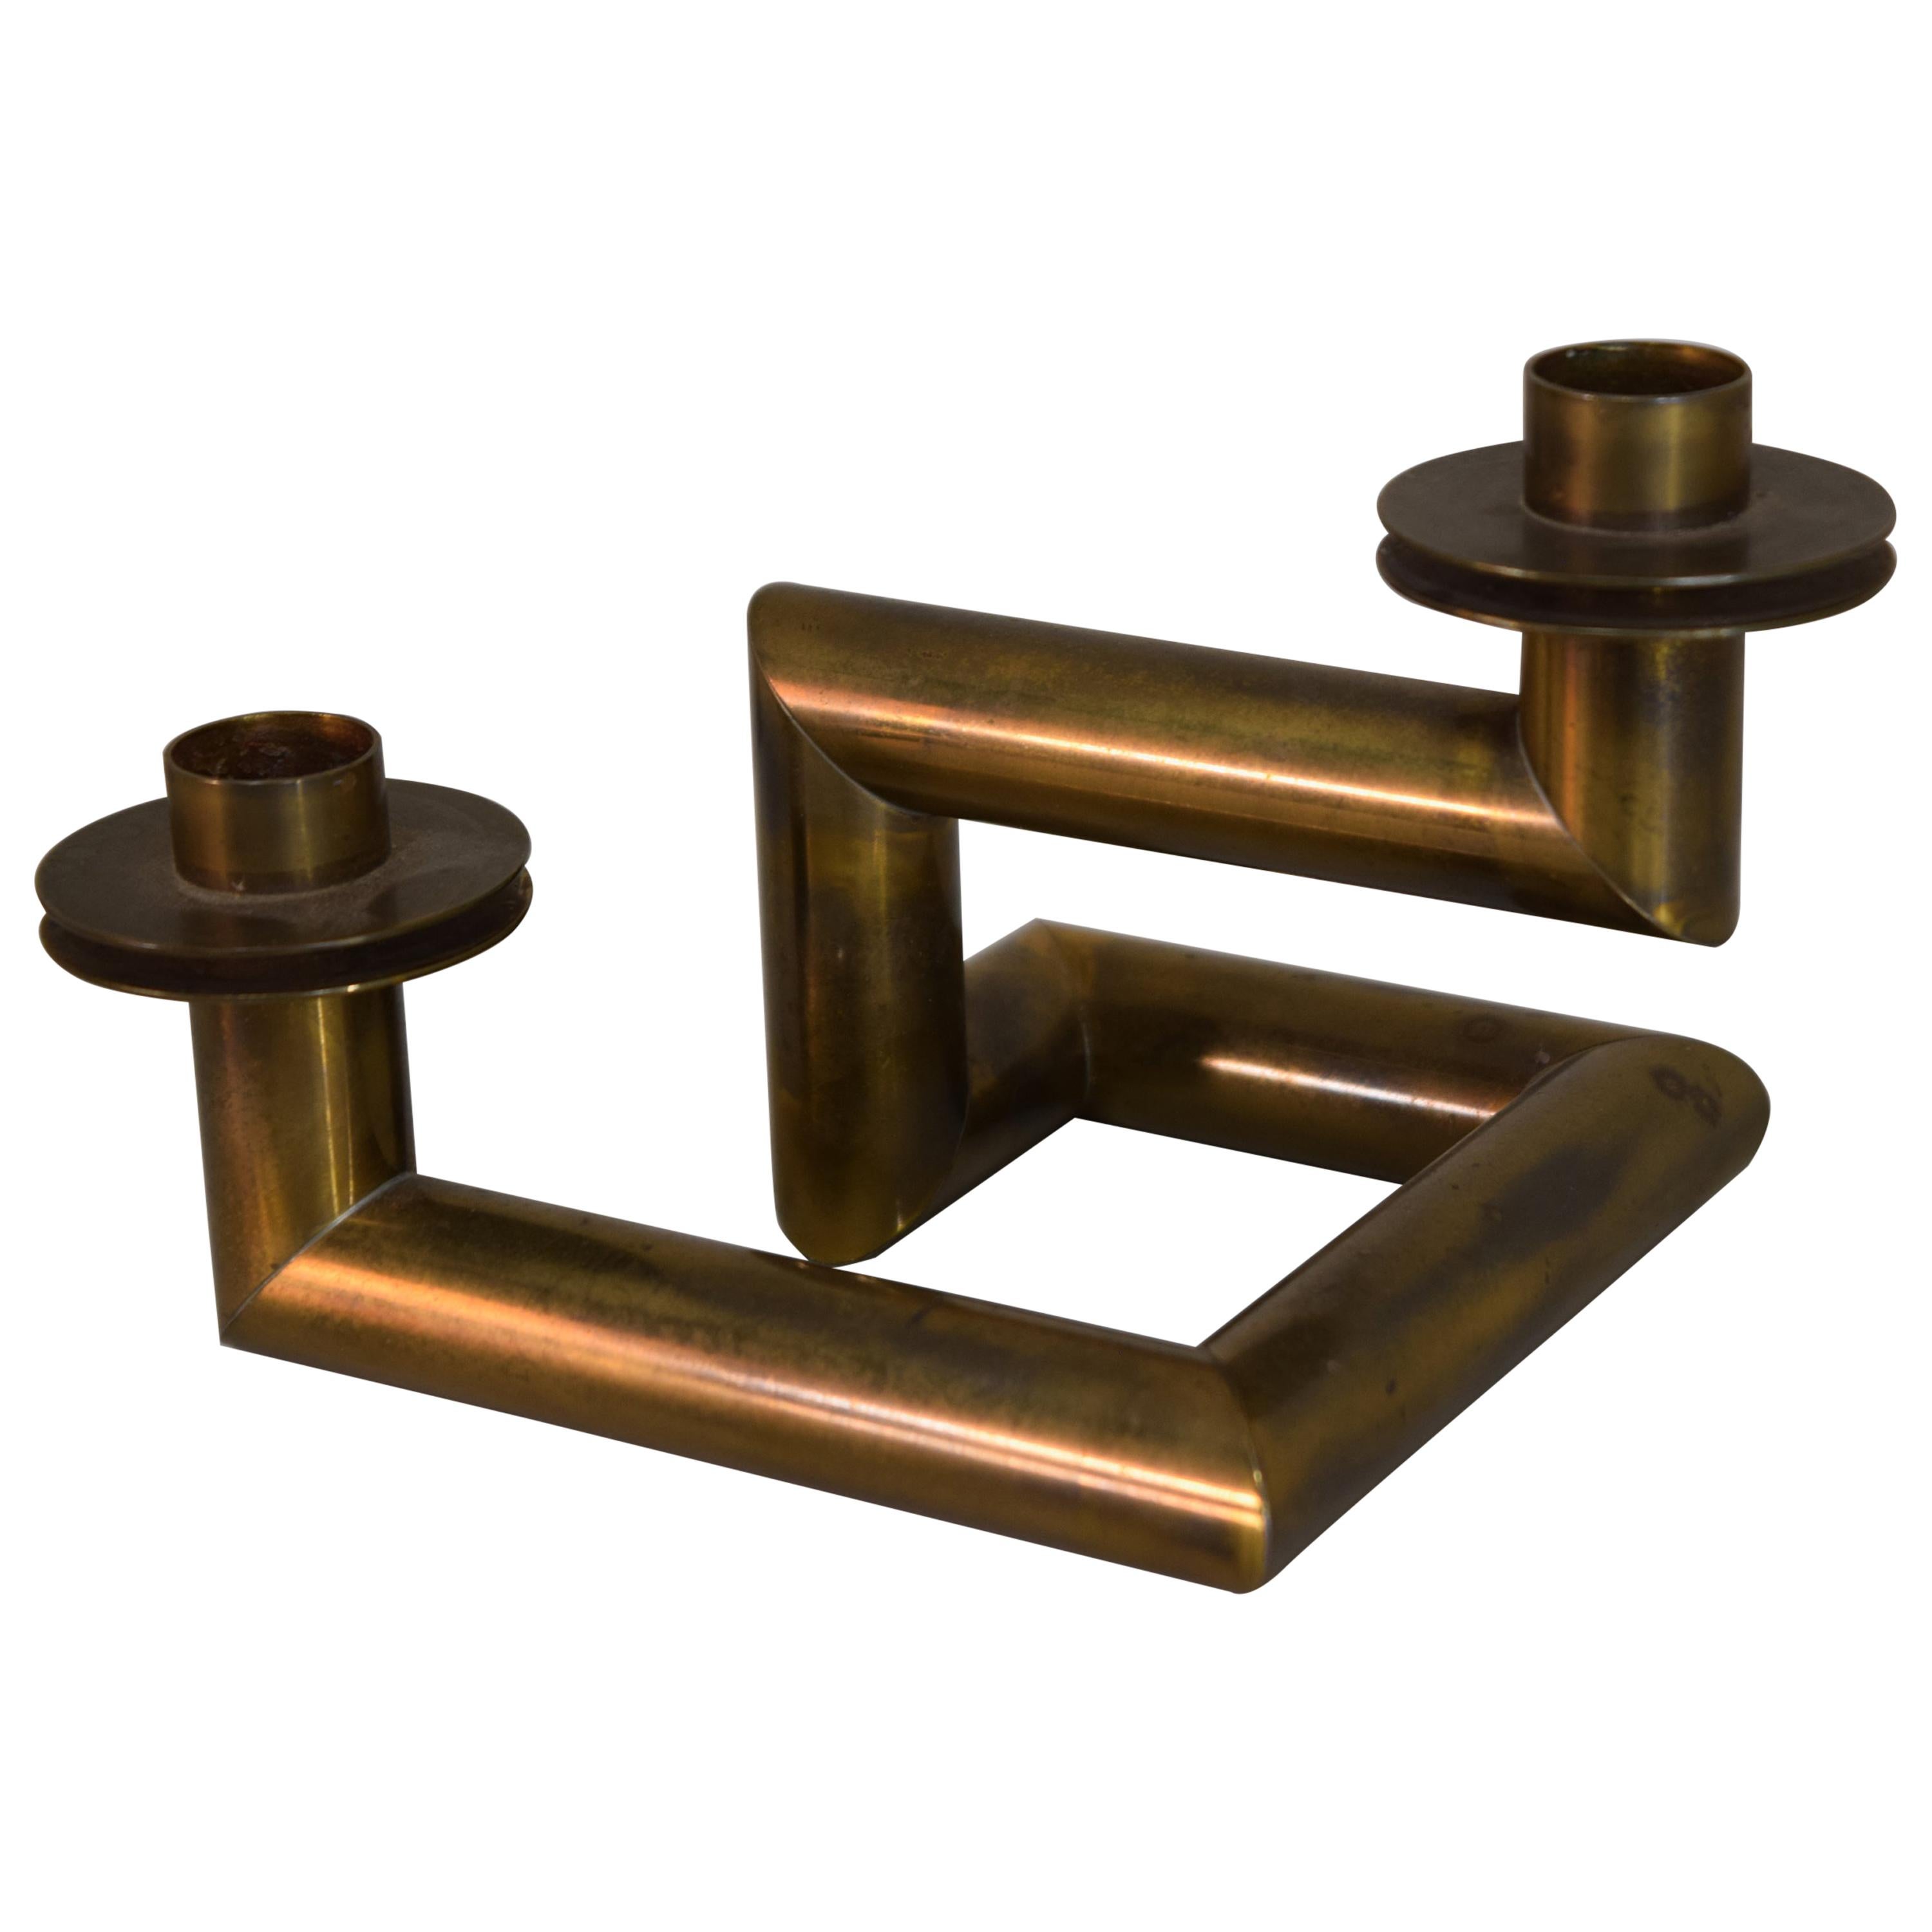 Geometric Art Deco Candle Holder For Sale